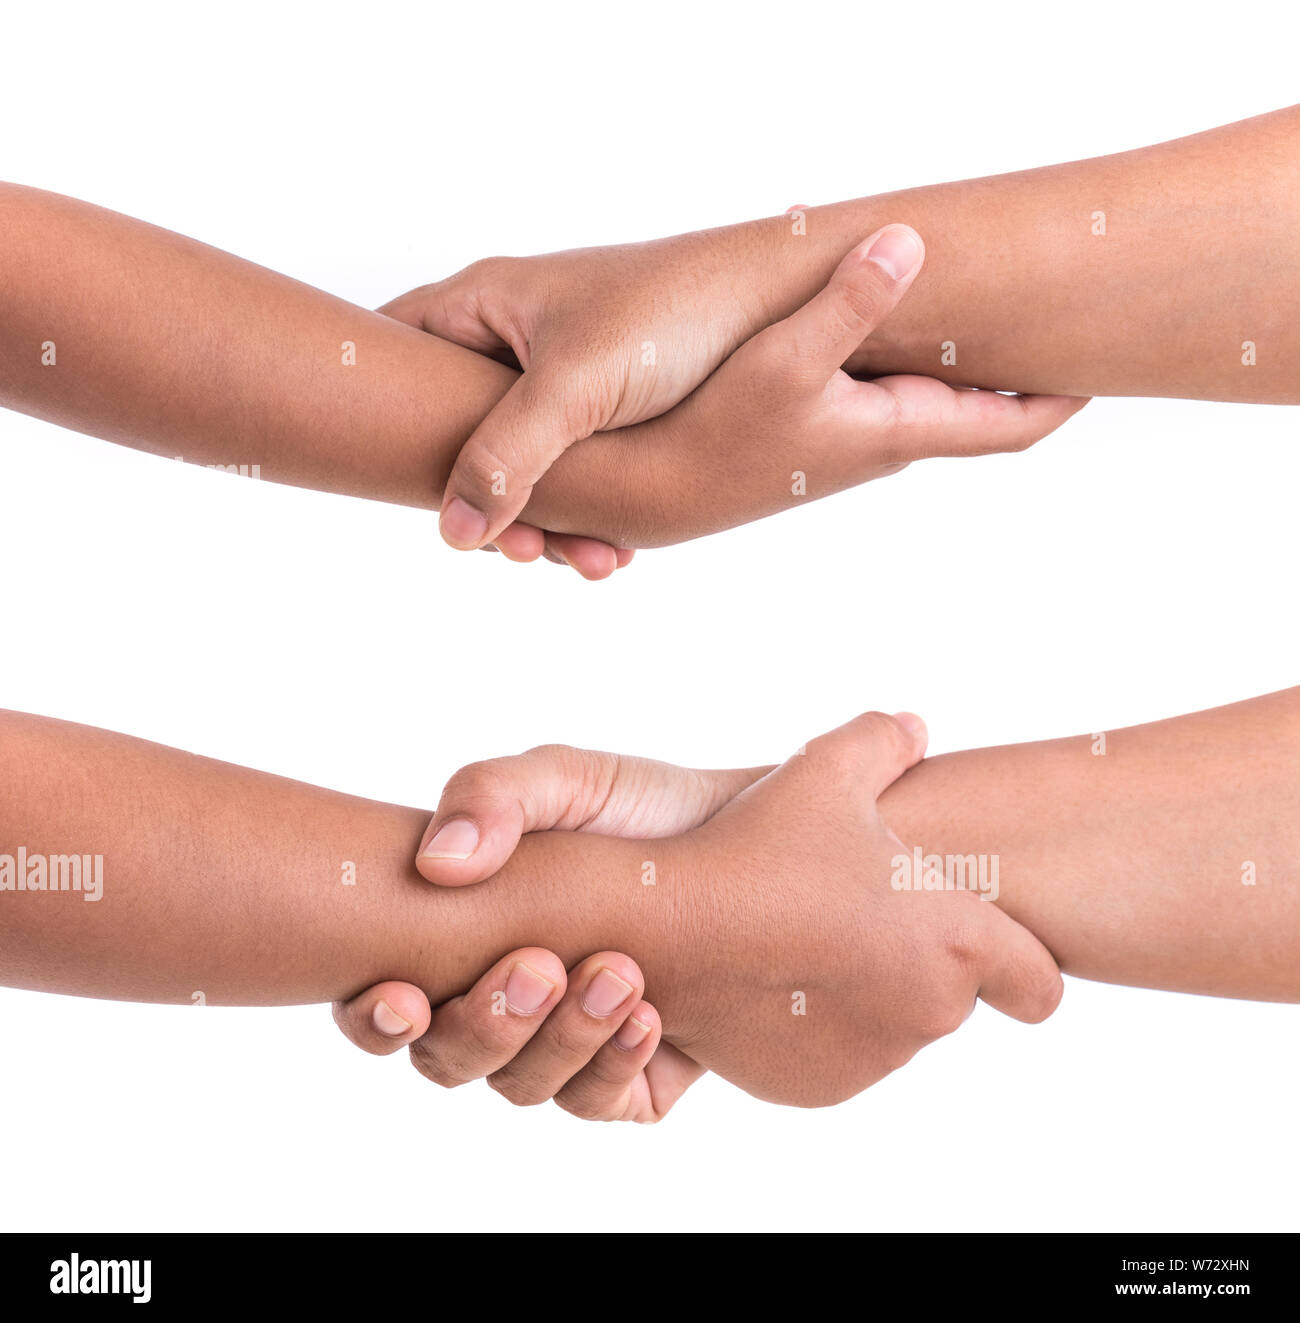 Two hands holding together. Help or support concept. Isolated on white background Stock Photo